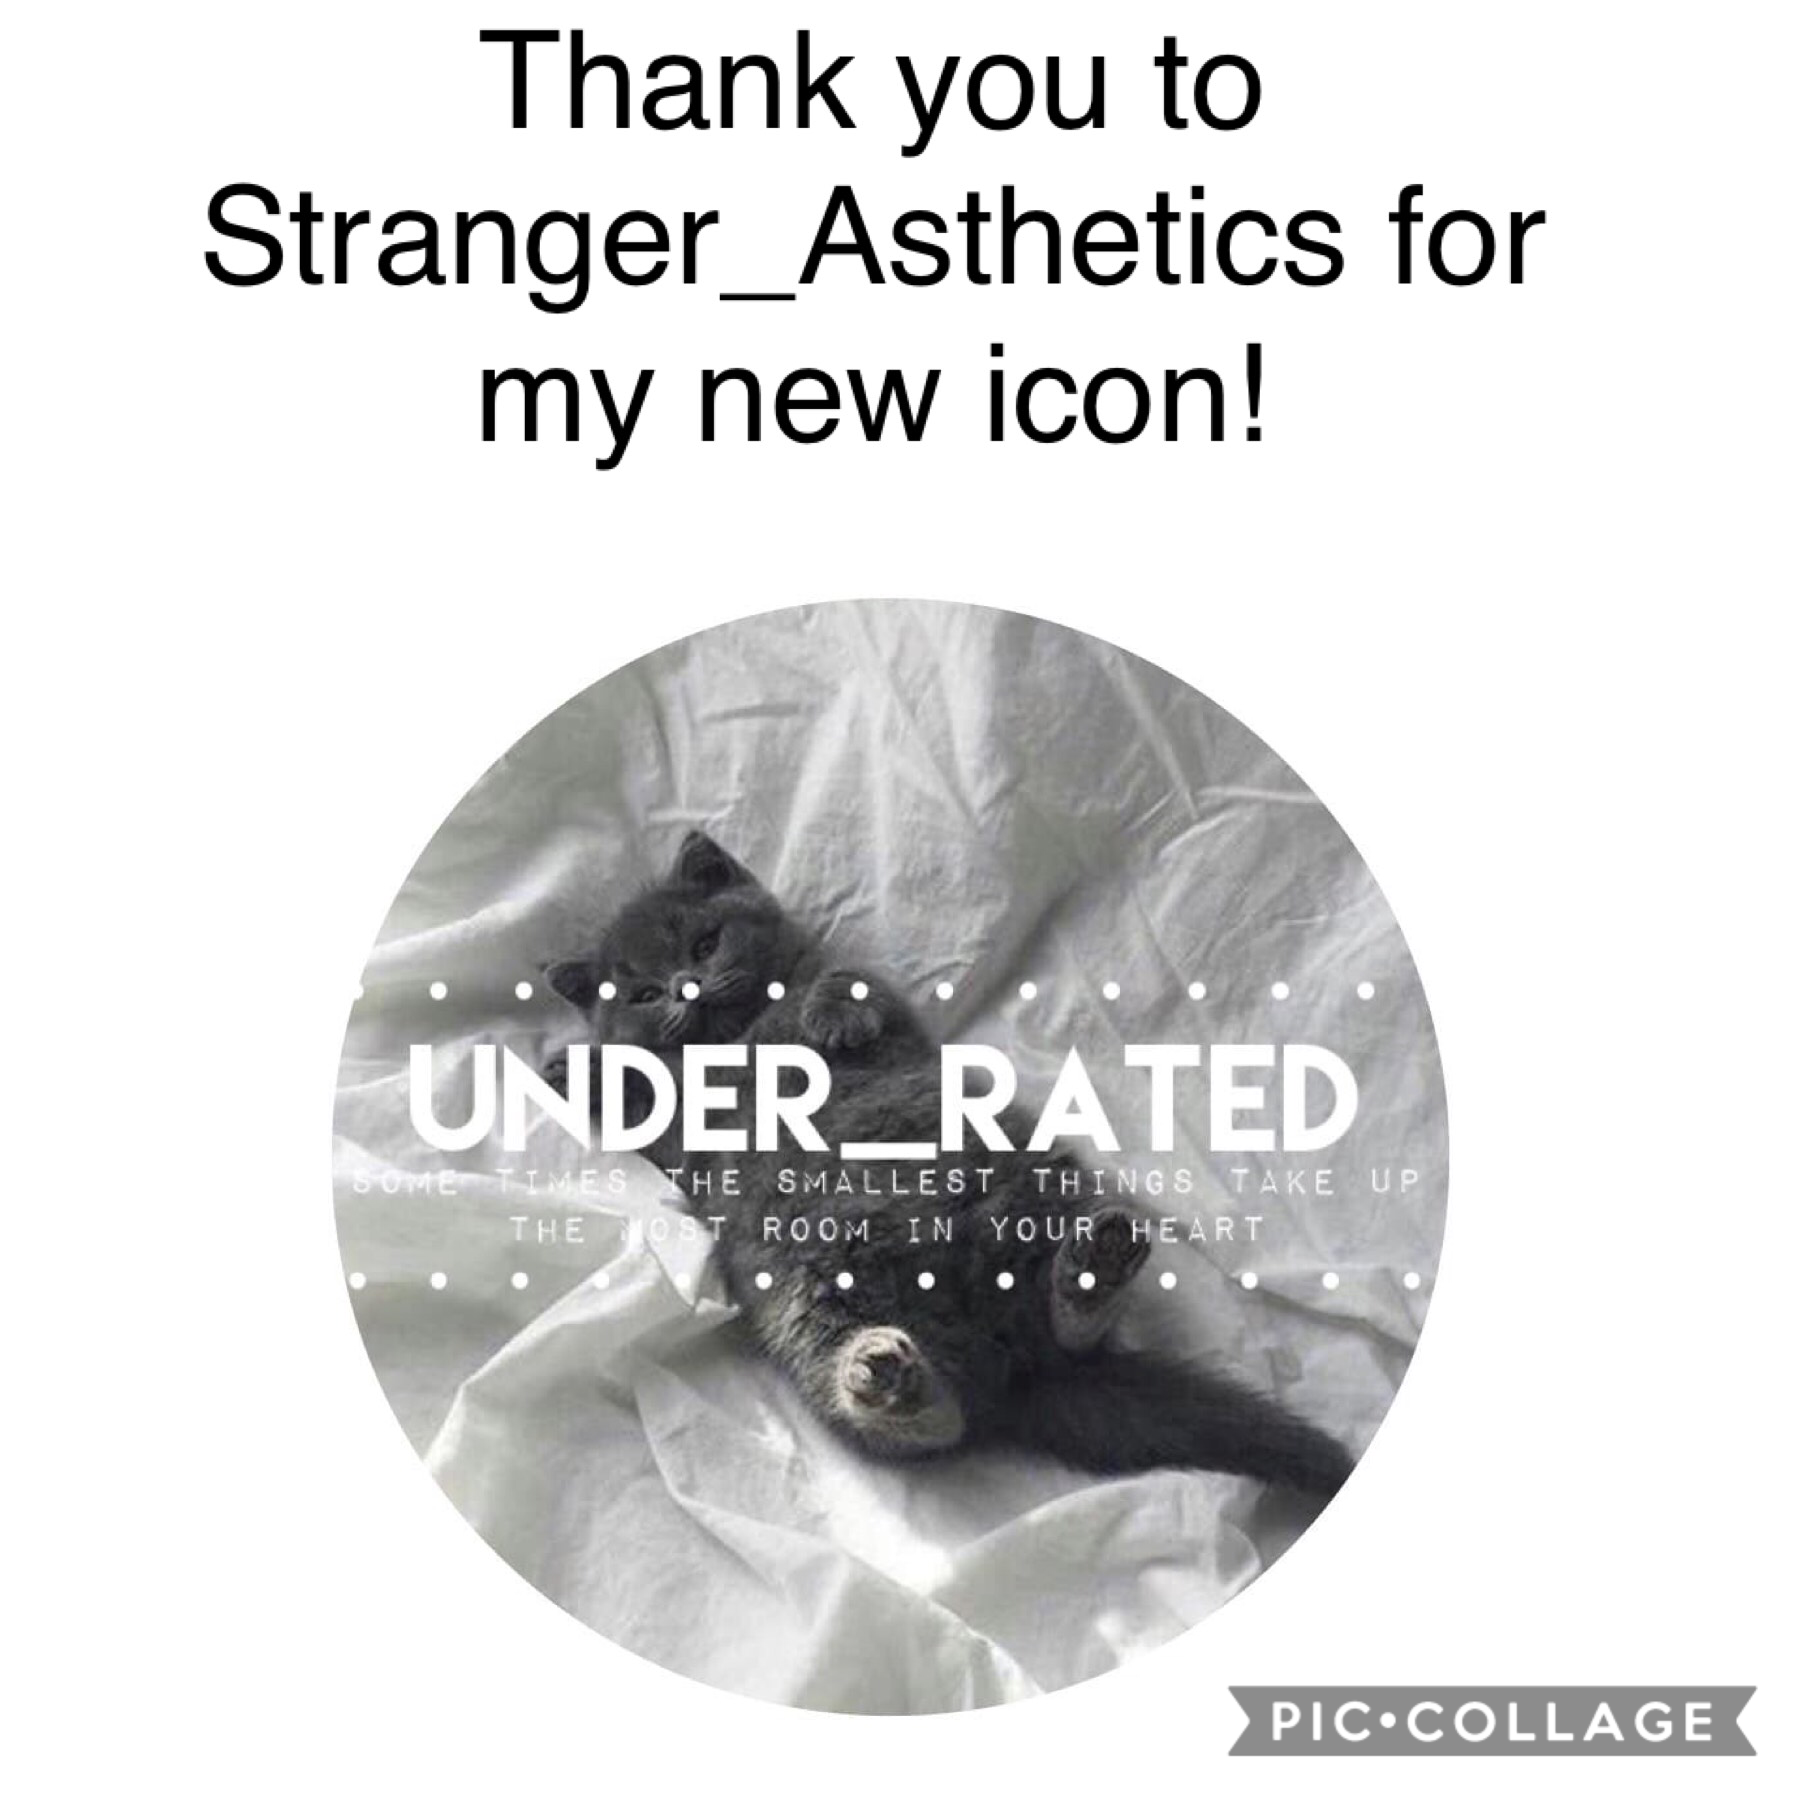 Thank for the cute icon!